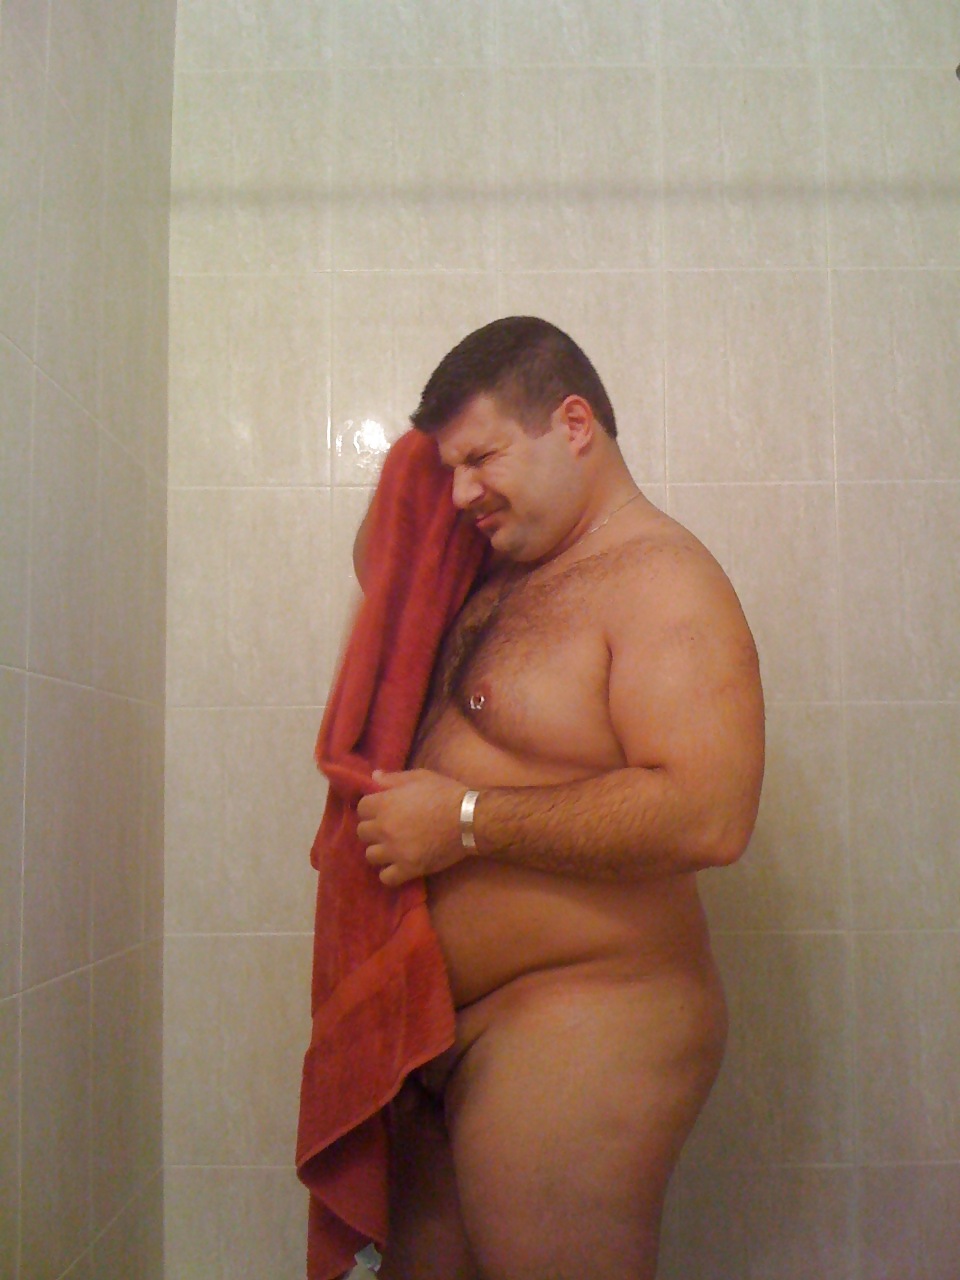 Handsome Man - See and Save As dionysus big handsome chubby men porn pict - 4crot.com